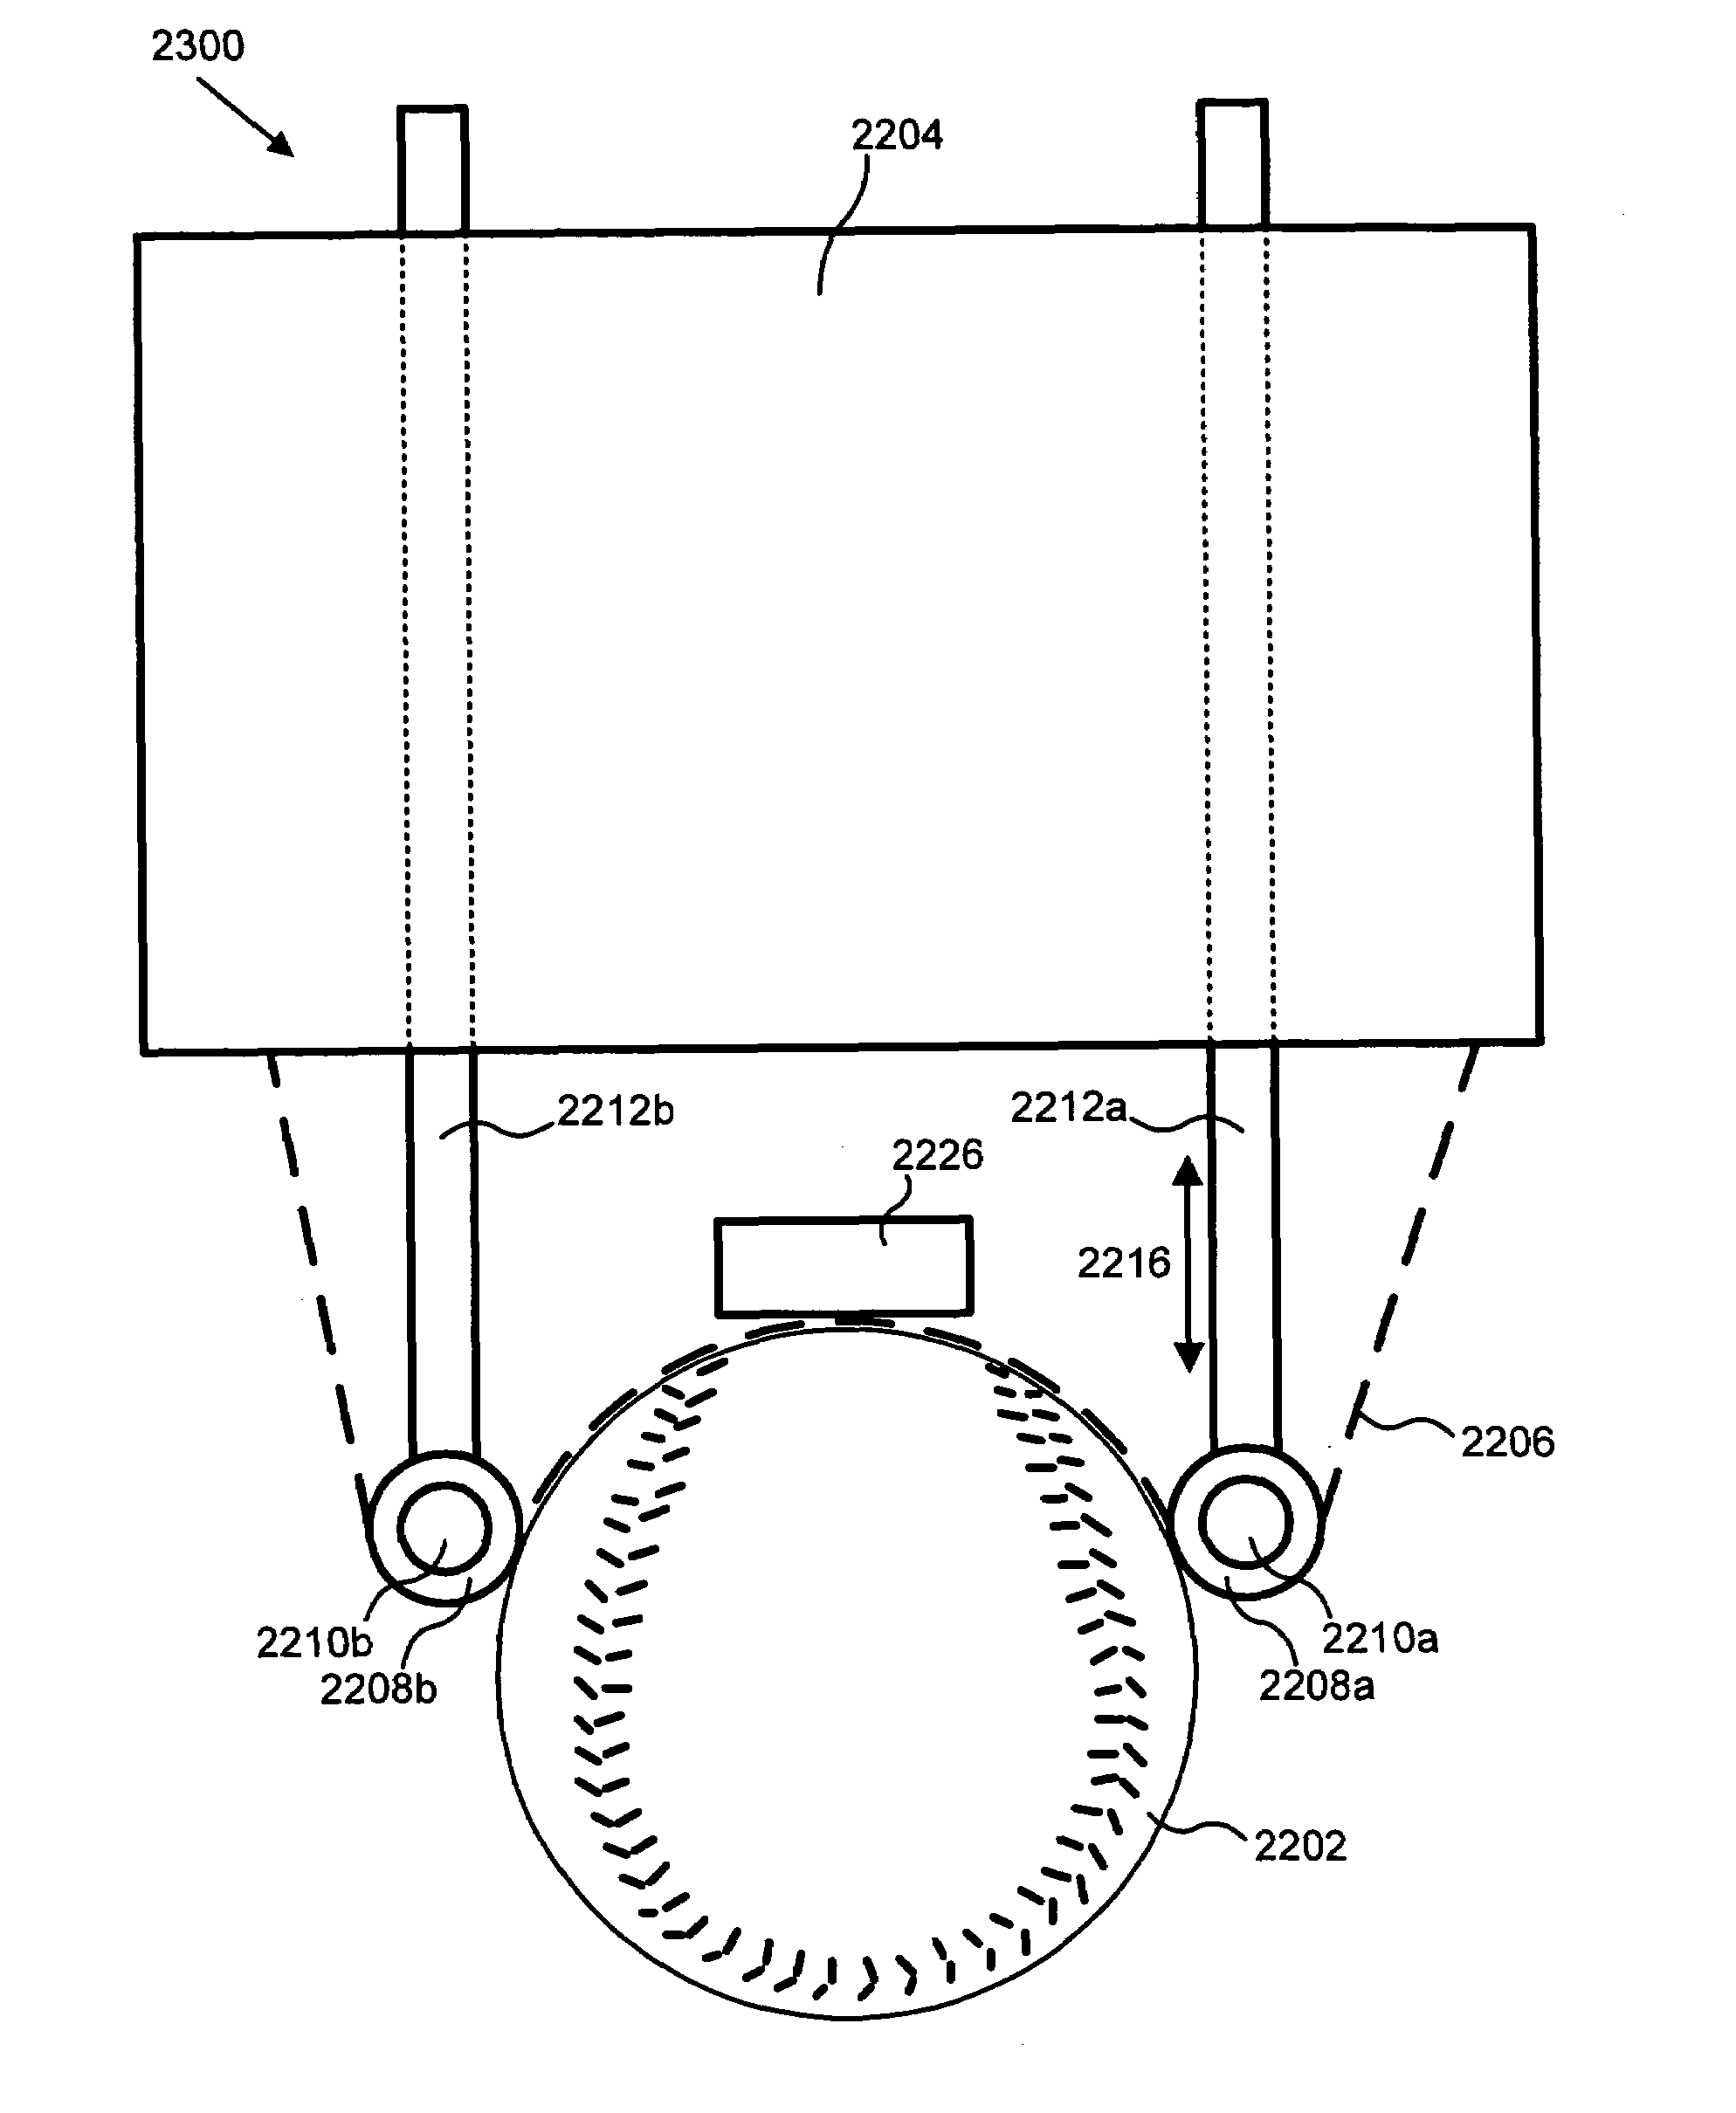 Apparatus, system, and method for multi-dimensional registration printing